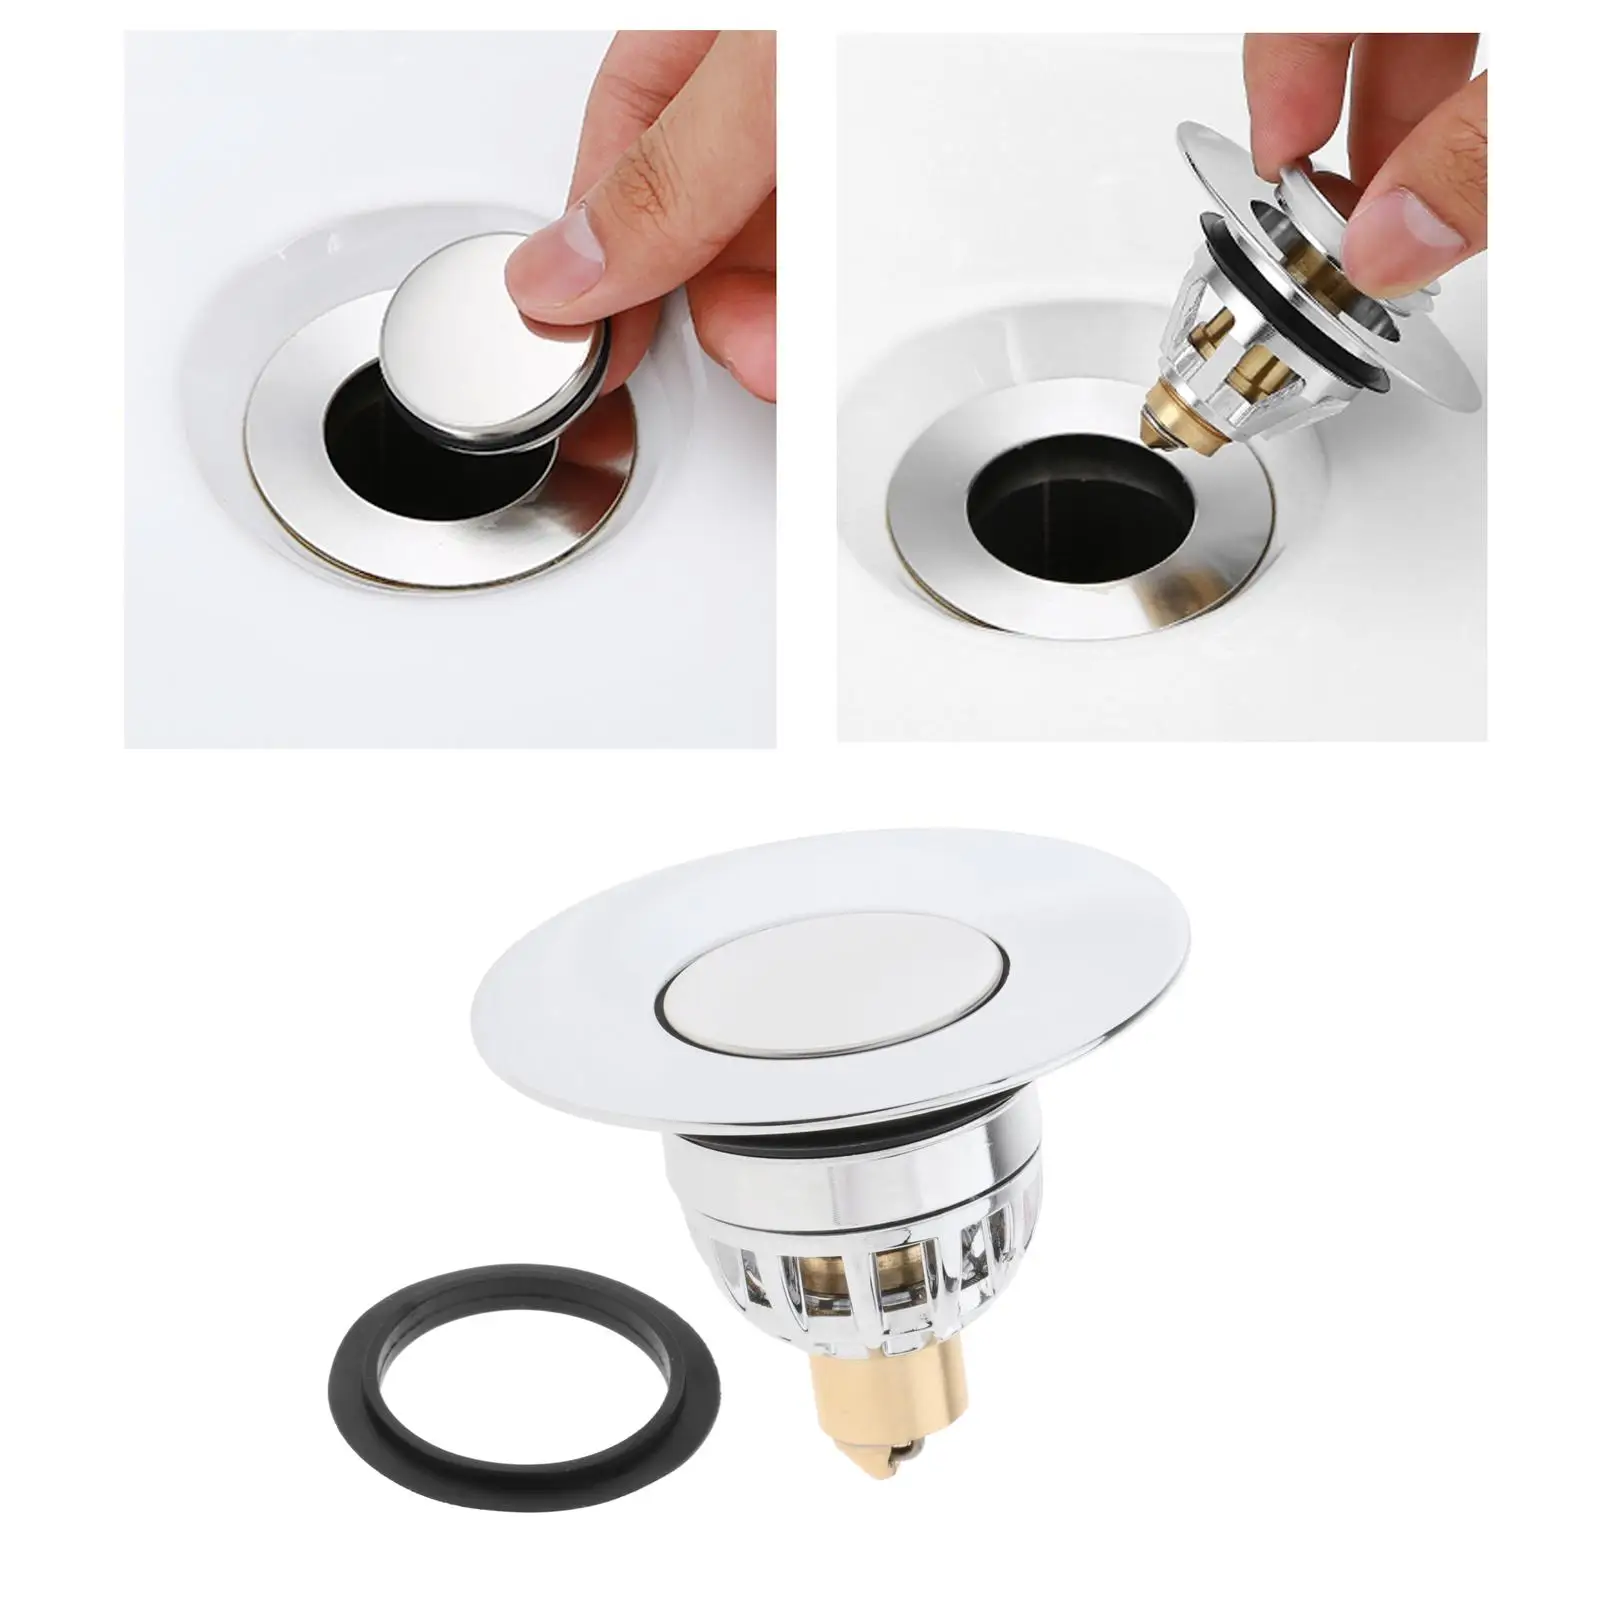 Core Push Type Basin -Sink Plug Drain Filter Stopper for Drain Hole 1.34-1.57 inches